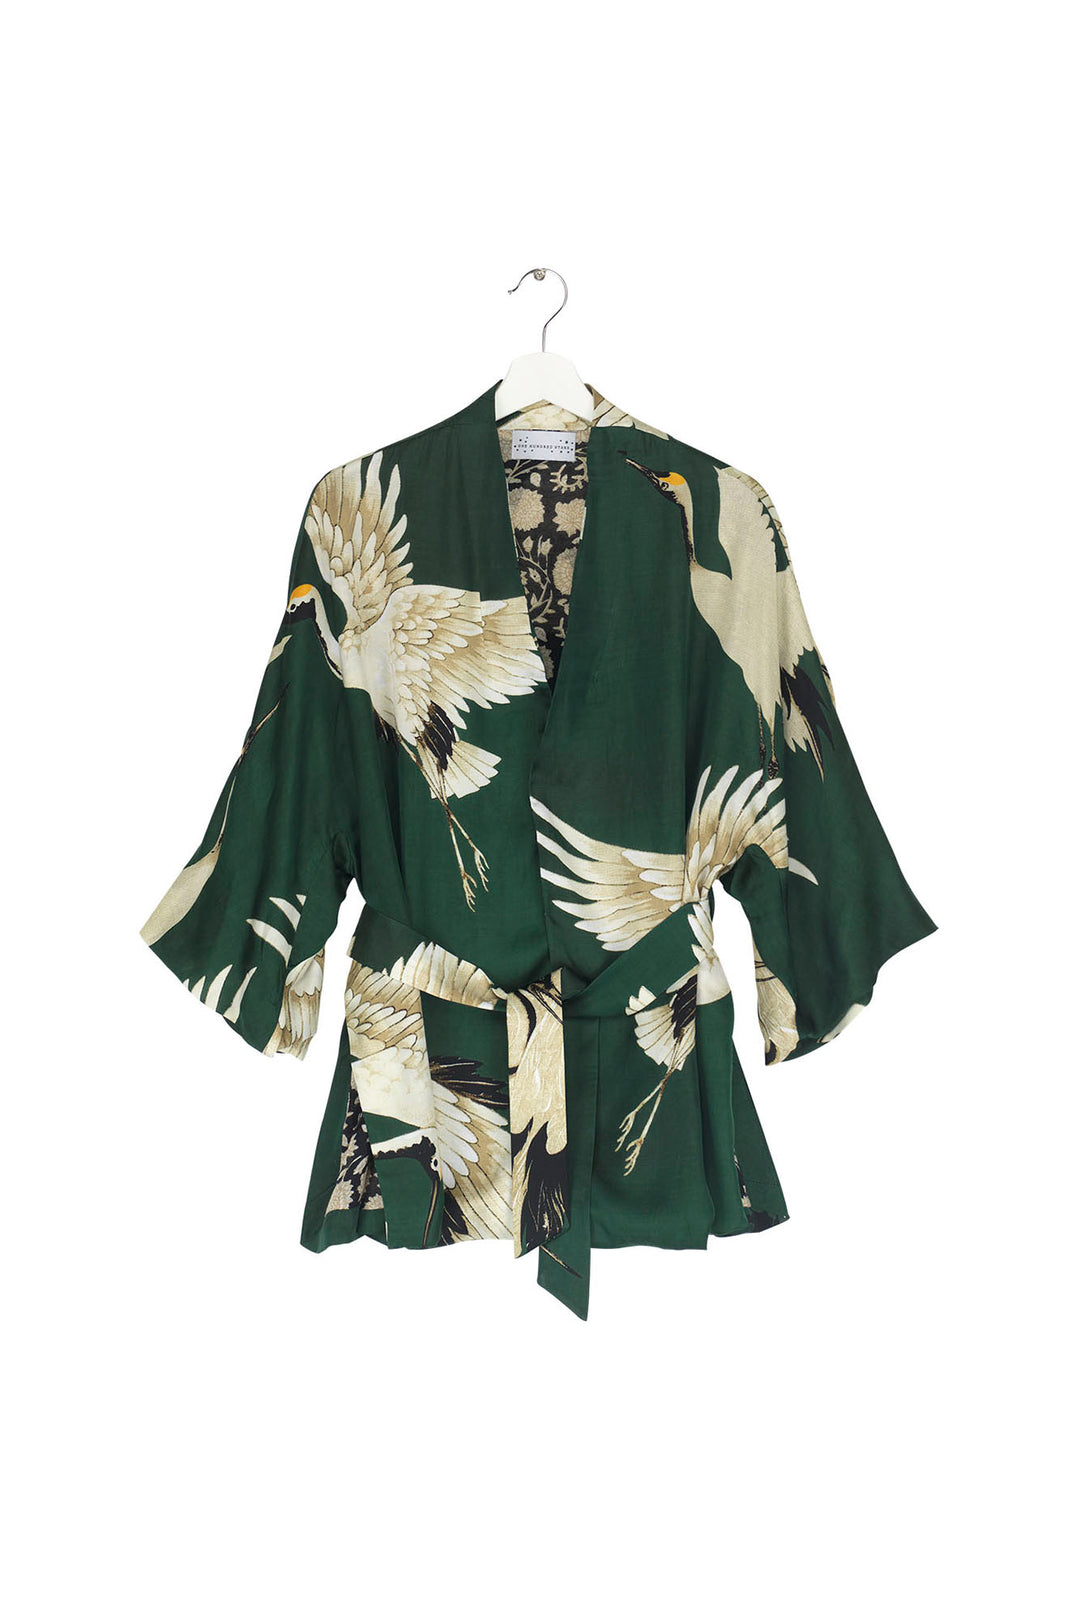 ladies belted wrap jacket satin green background with stork bird print by One Hundred Stars